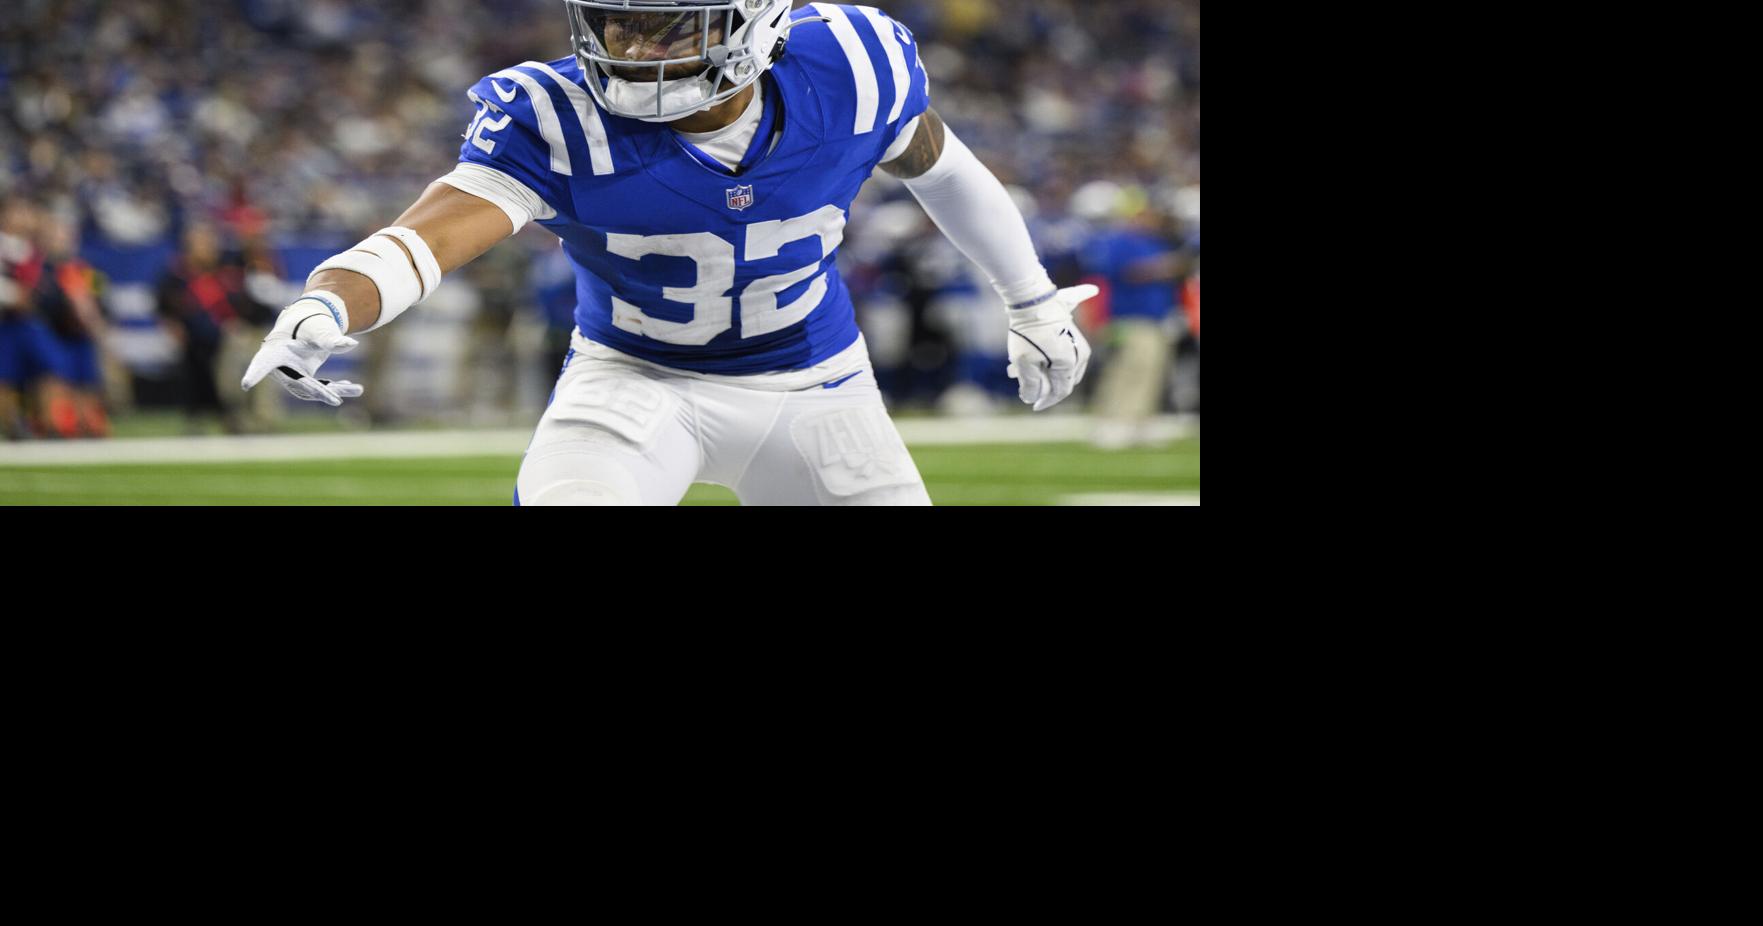 WESTFIELD, IN - JULY 28: Indianapolis Colts defensive back Rodney